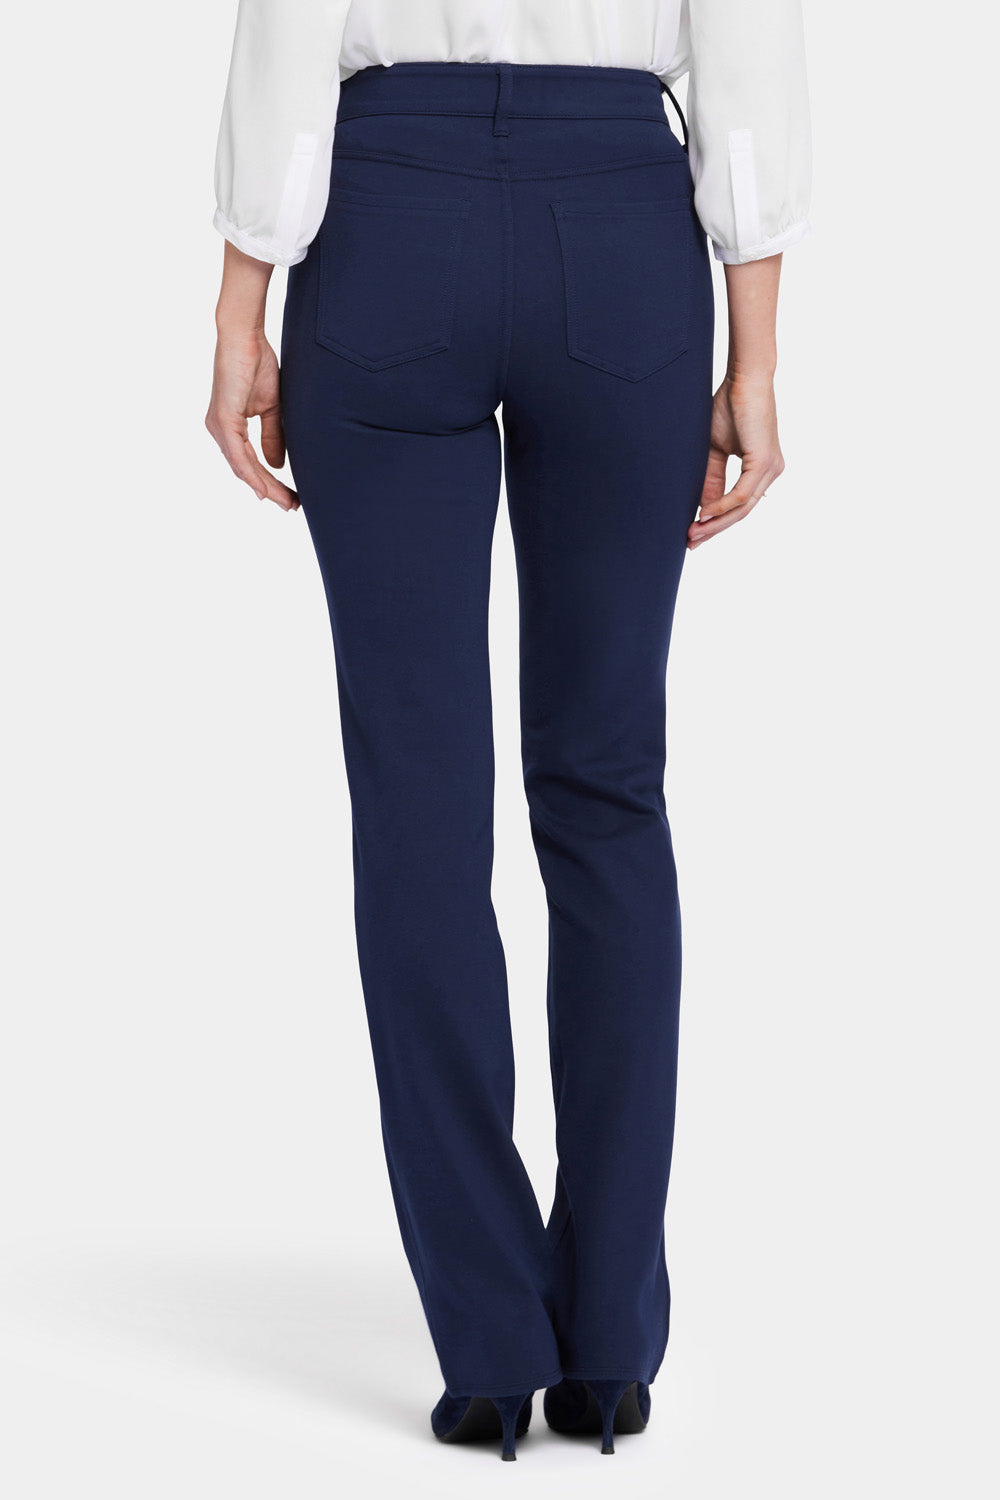 NYDJ Marilyn Straight Pants Sculpt-Her™ Collection - Oxford Navy